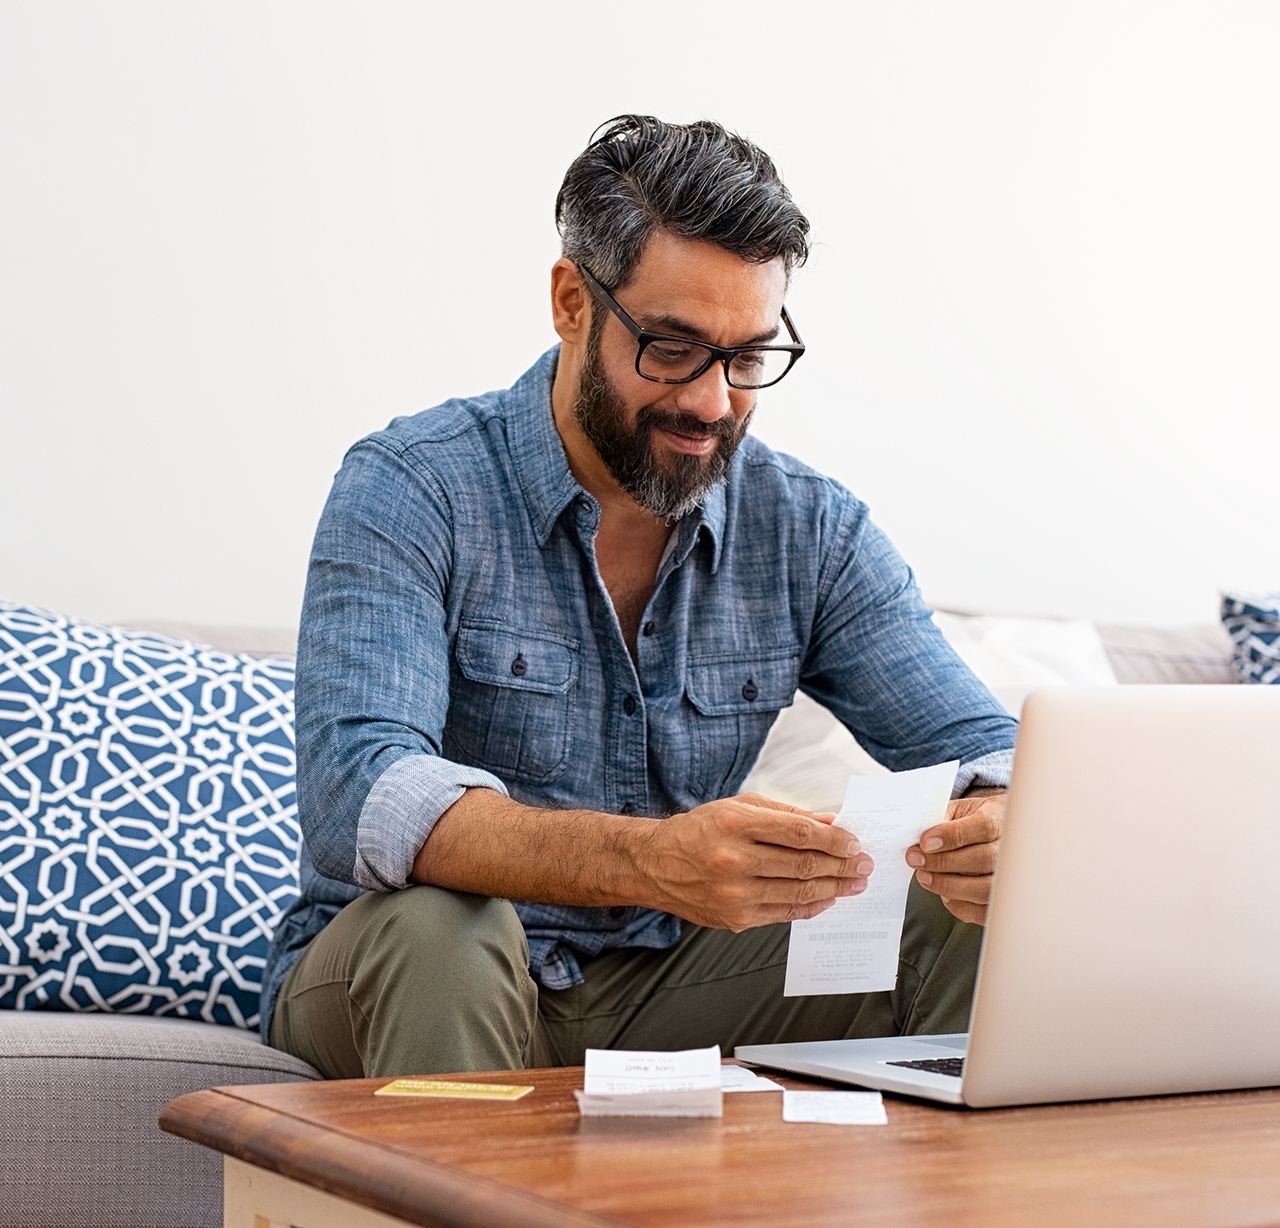 Mature casual man using laptop while looking at invoice. Smiling latin man managing finance with bills and laptop while sitting on couch at home. Hispanic guy reading expenses wearing eyeglasses.